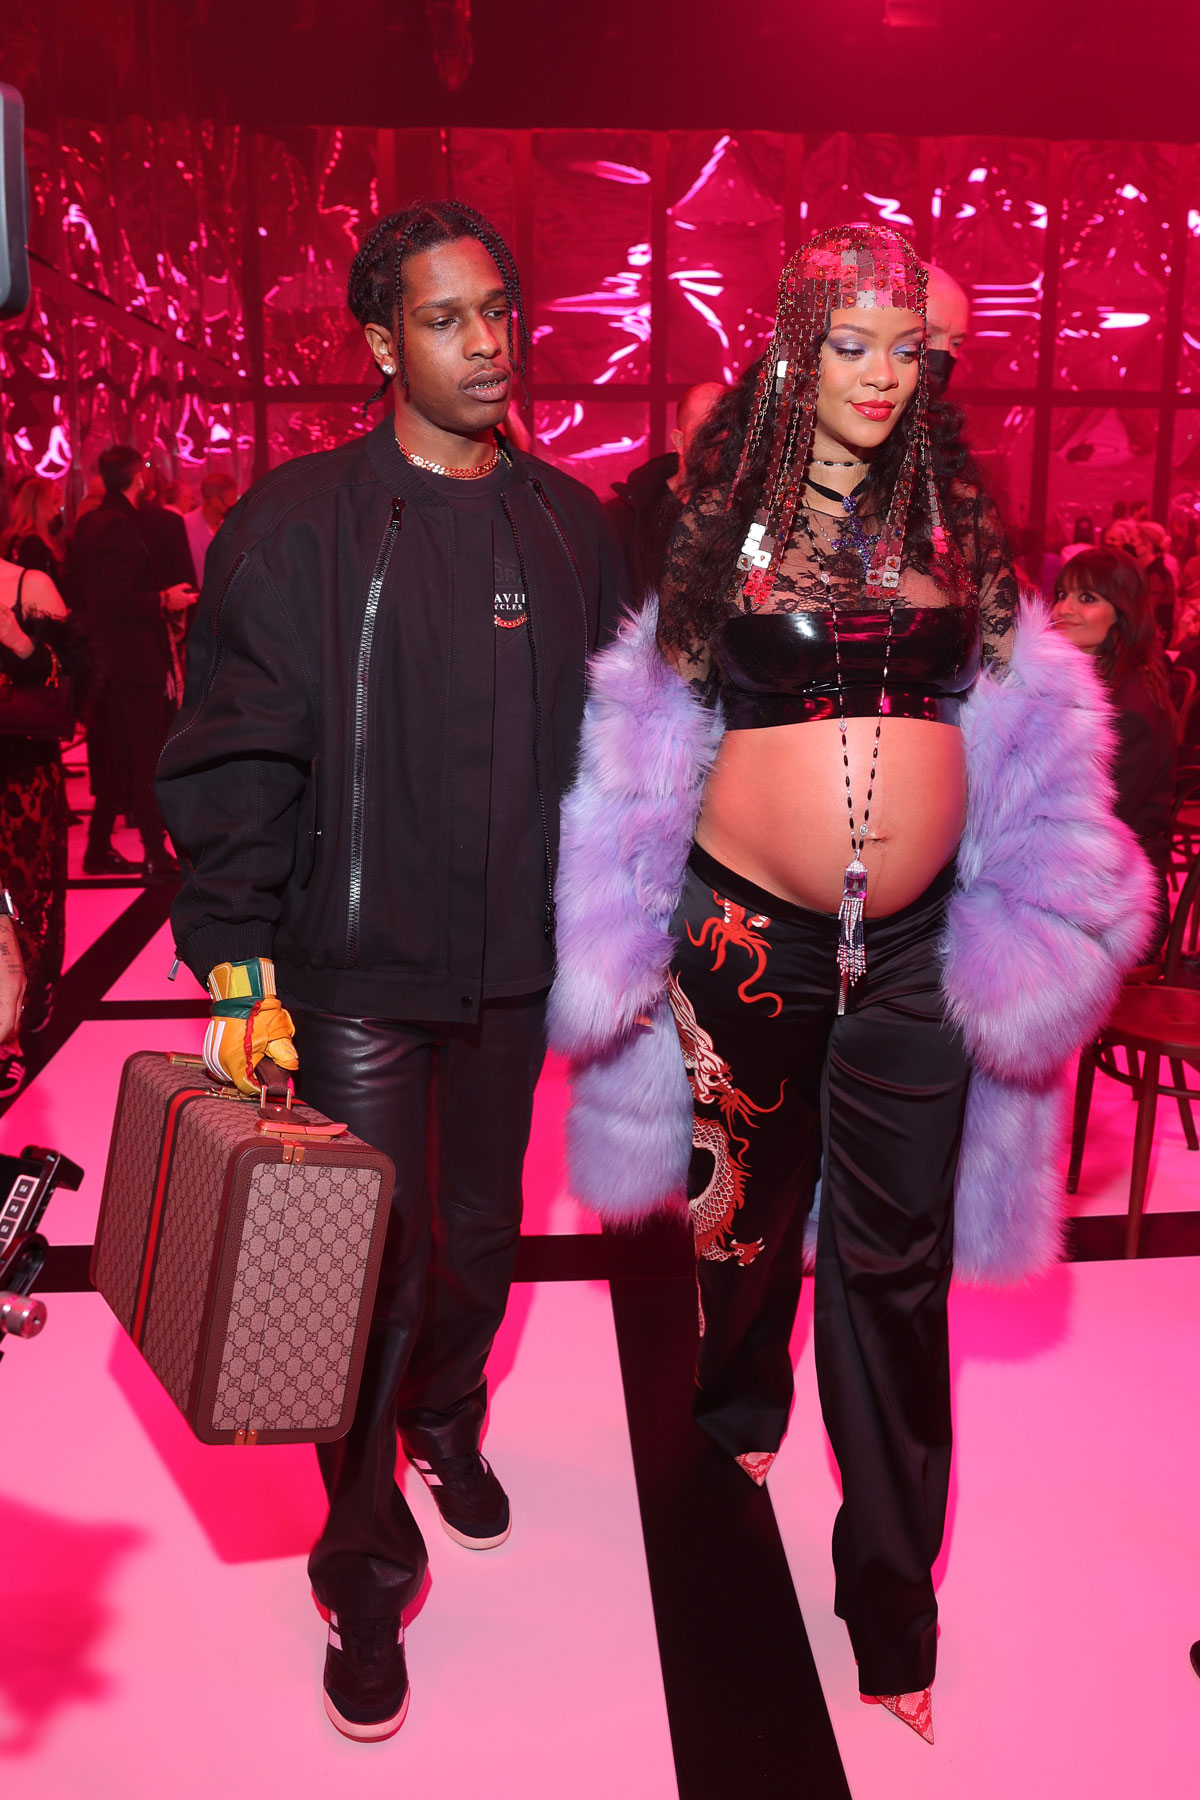 A$AP Rocky seen wearing a stylish outfit